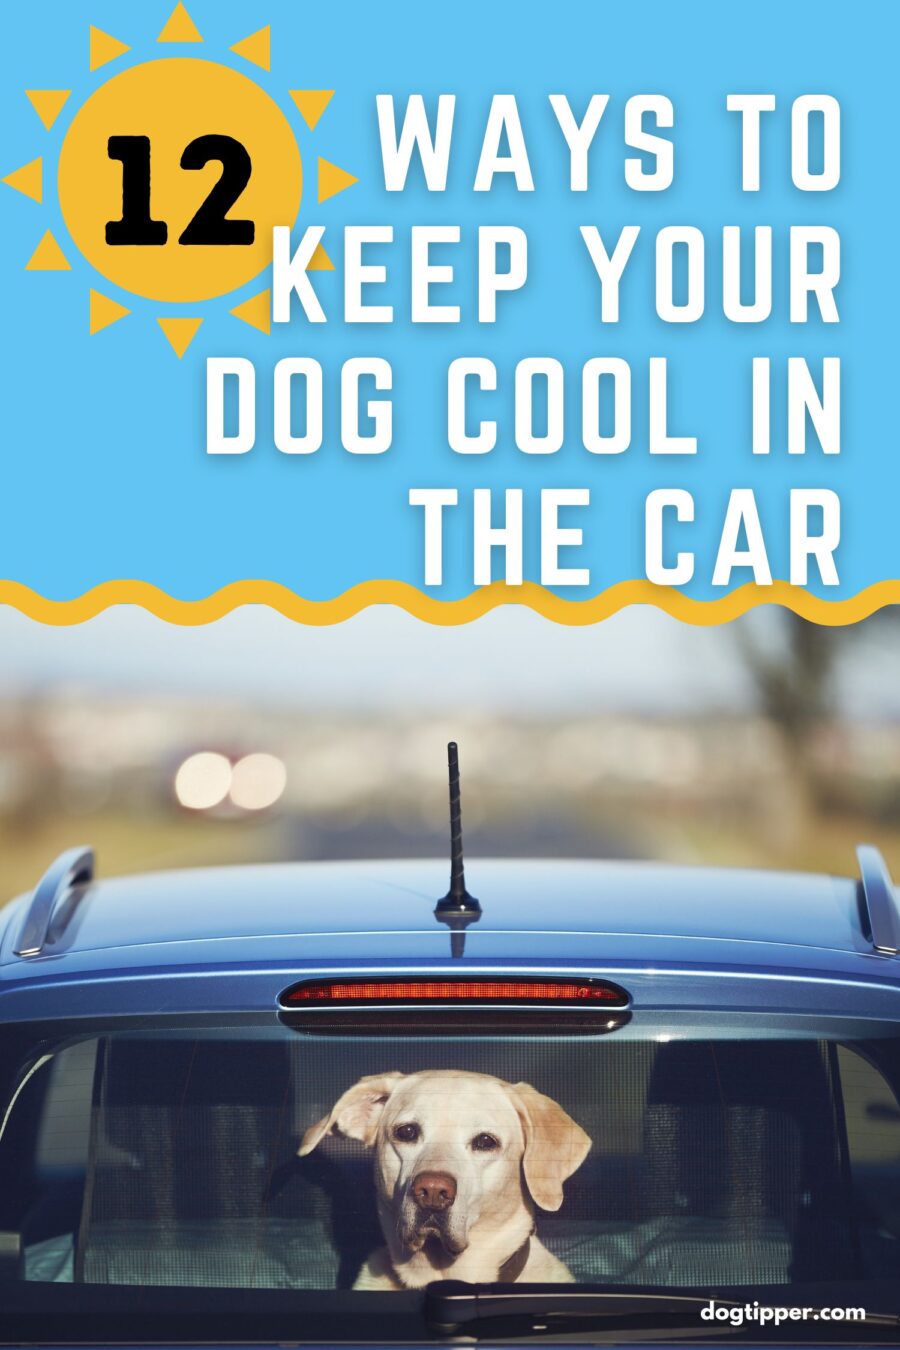 12 Ways to Keep Your Dog Cool in the Car